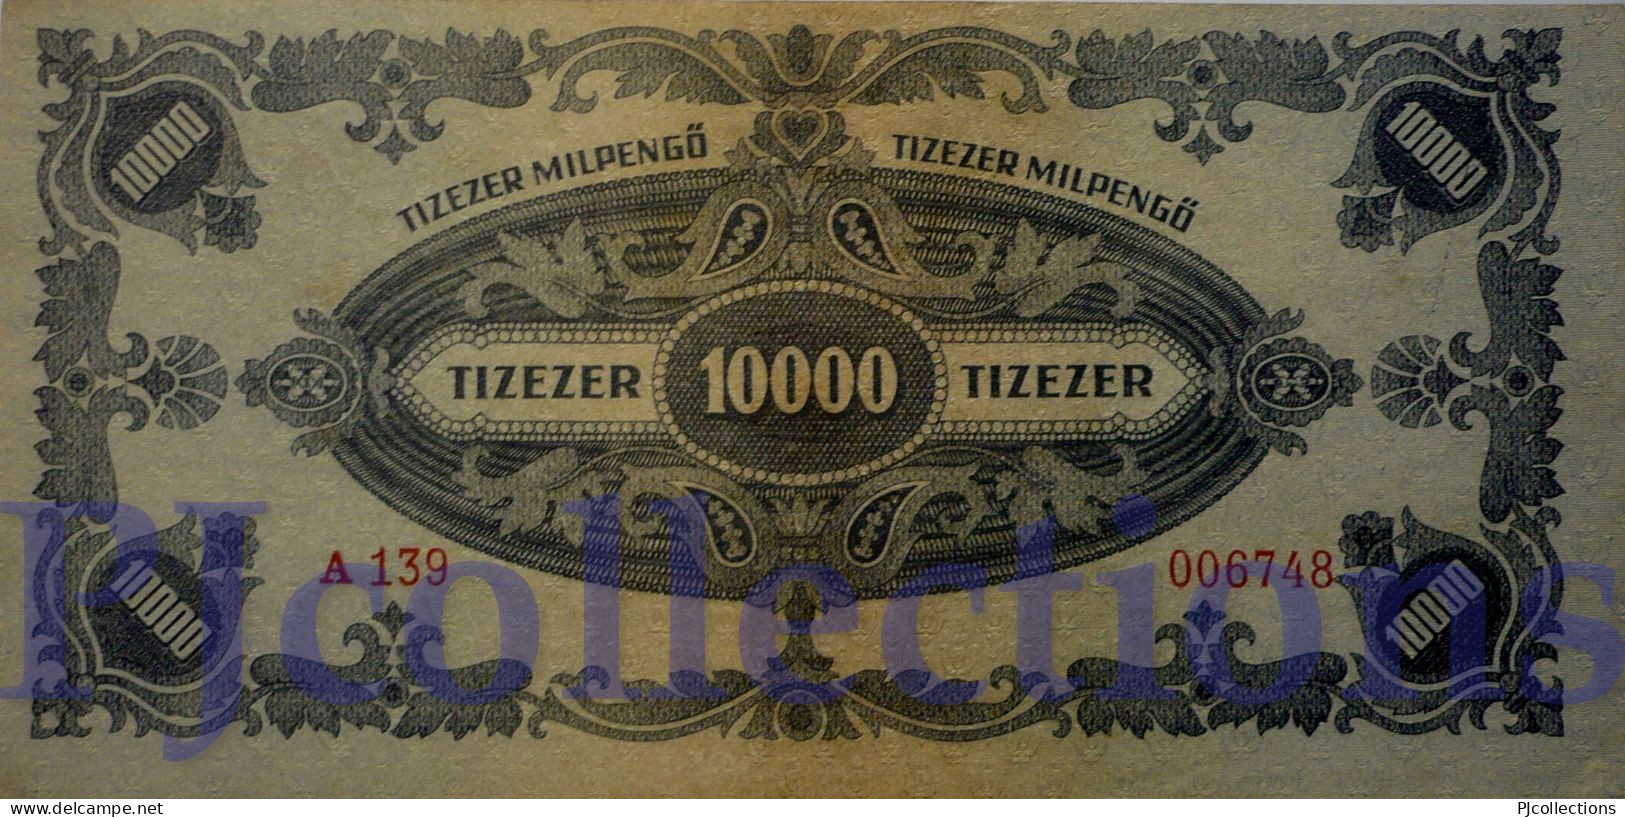 HUNGARY 10000 MILPENGO 1946 PICK 126 AU/UNC LOW SERIAL NUMBER "006748" - Hungary